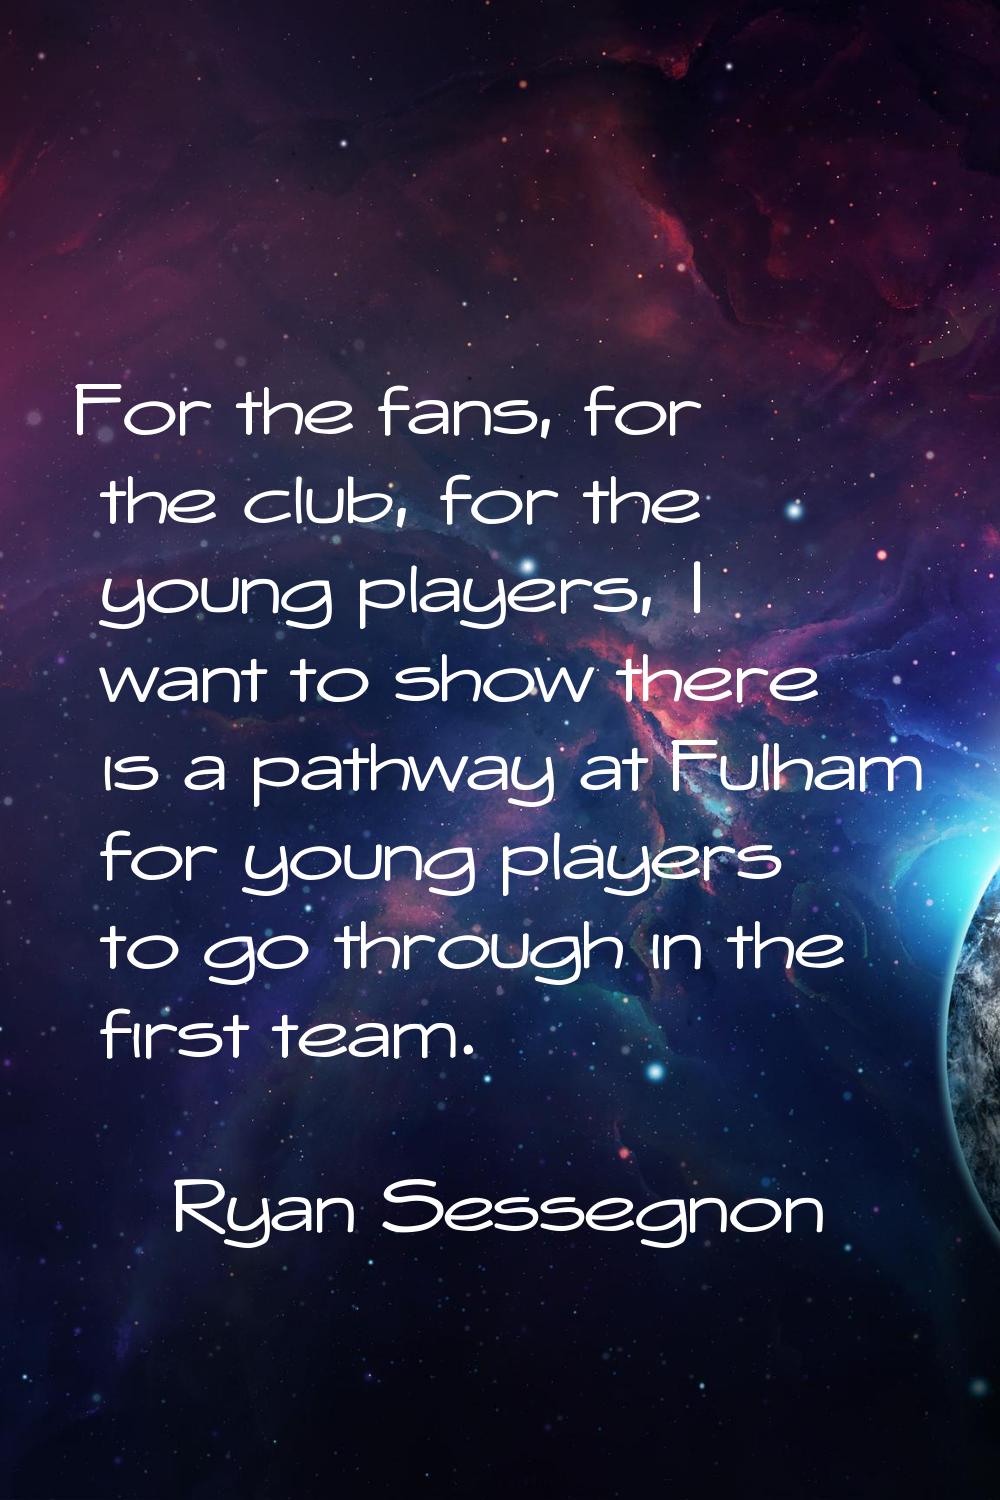 For the fans, for the club, for the young players, I want to show there is a pathway at Fulham for 